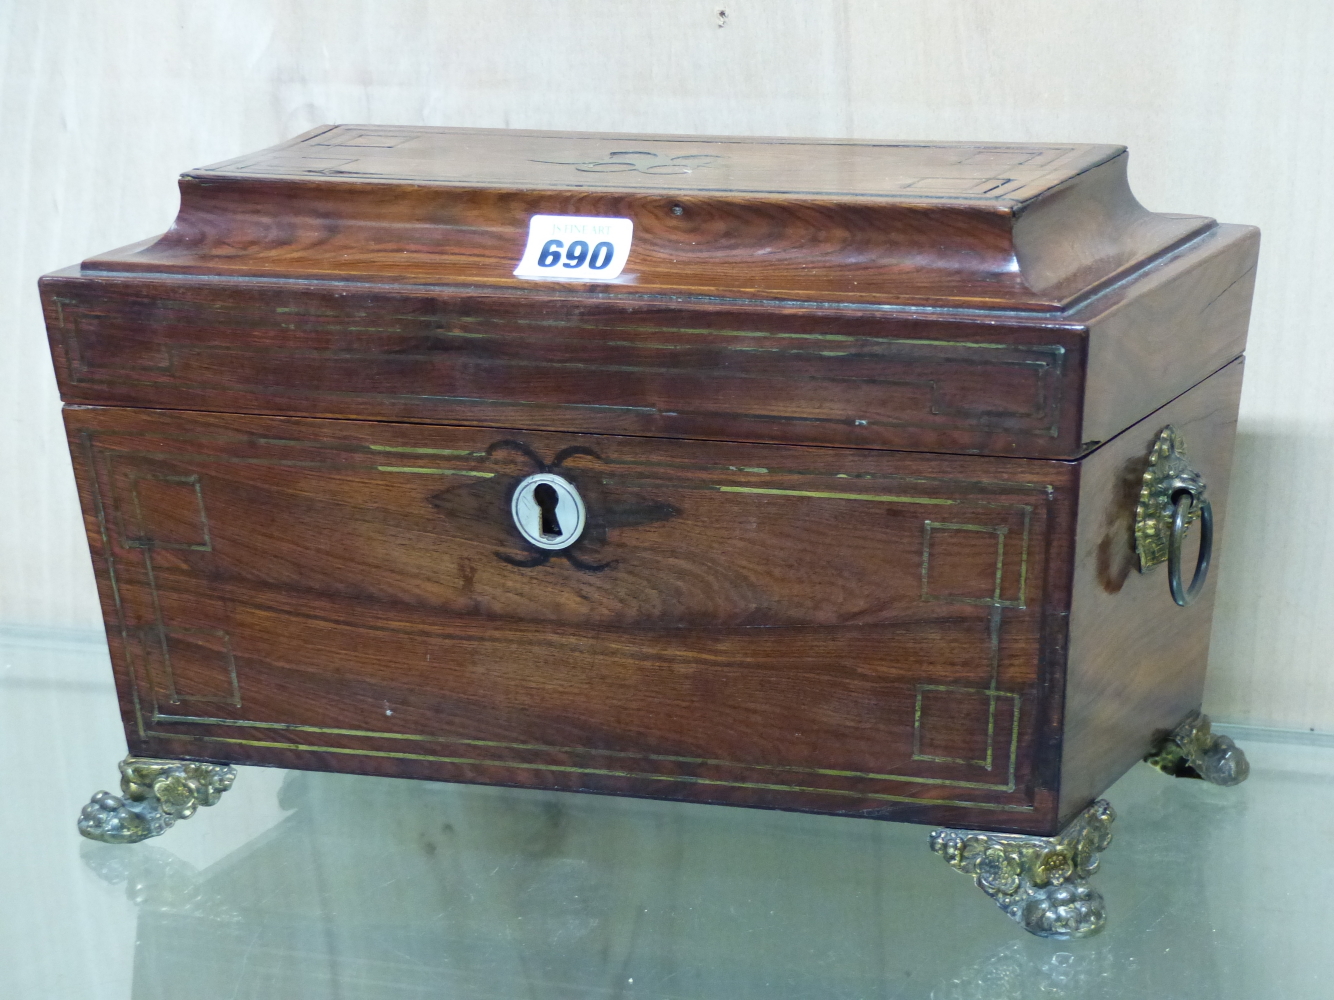 A REGENCY ROSEWOOD AND BRASS INLAID SARCOPHAGUS FORM TEA CADDY WITH BRASS RING HANDLES AND FEET. W. - Image 2 of 7